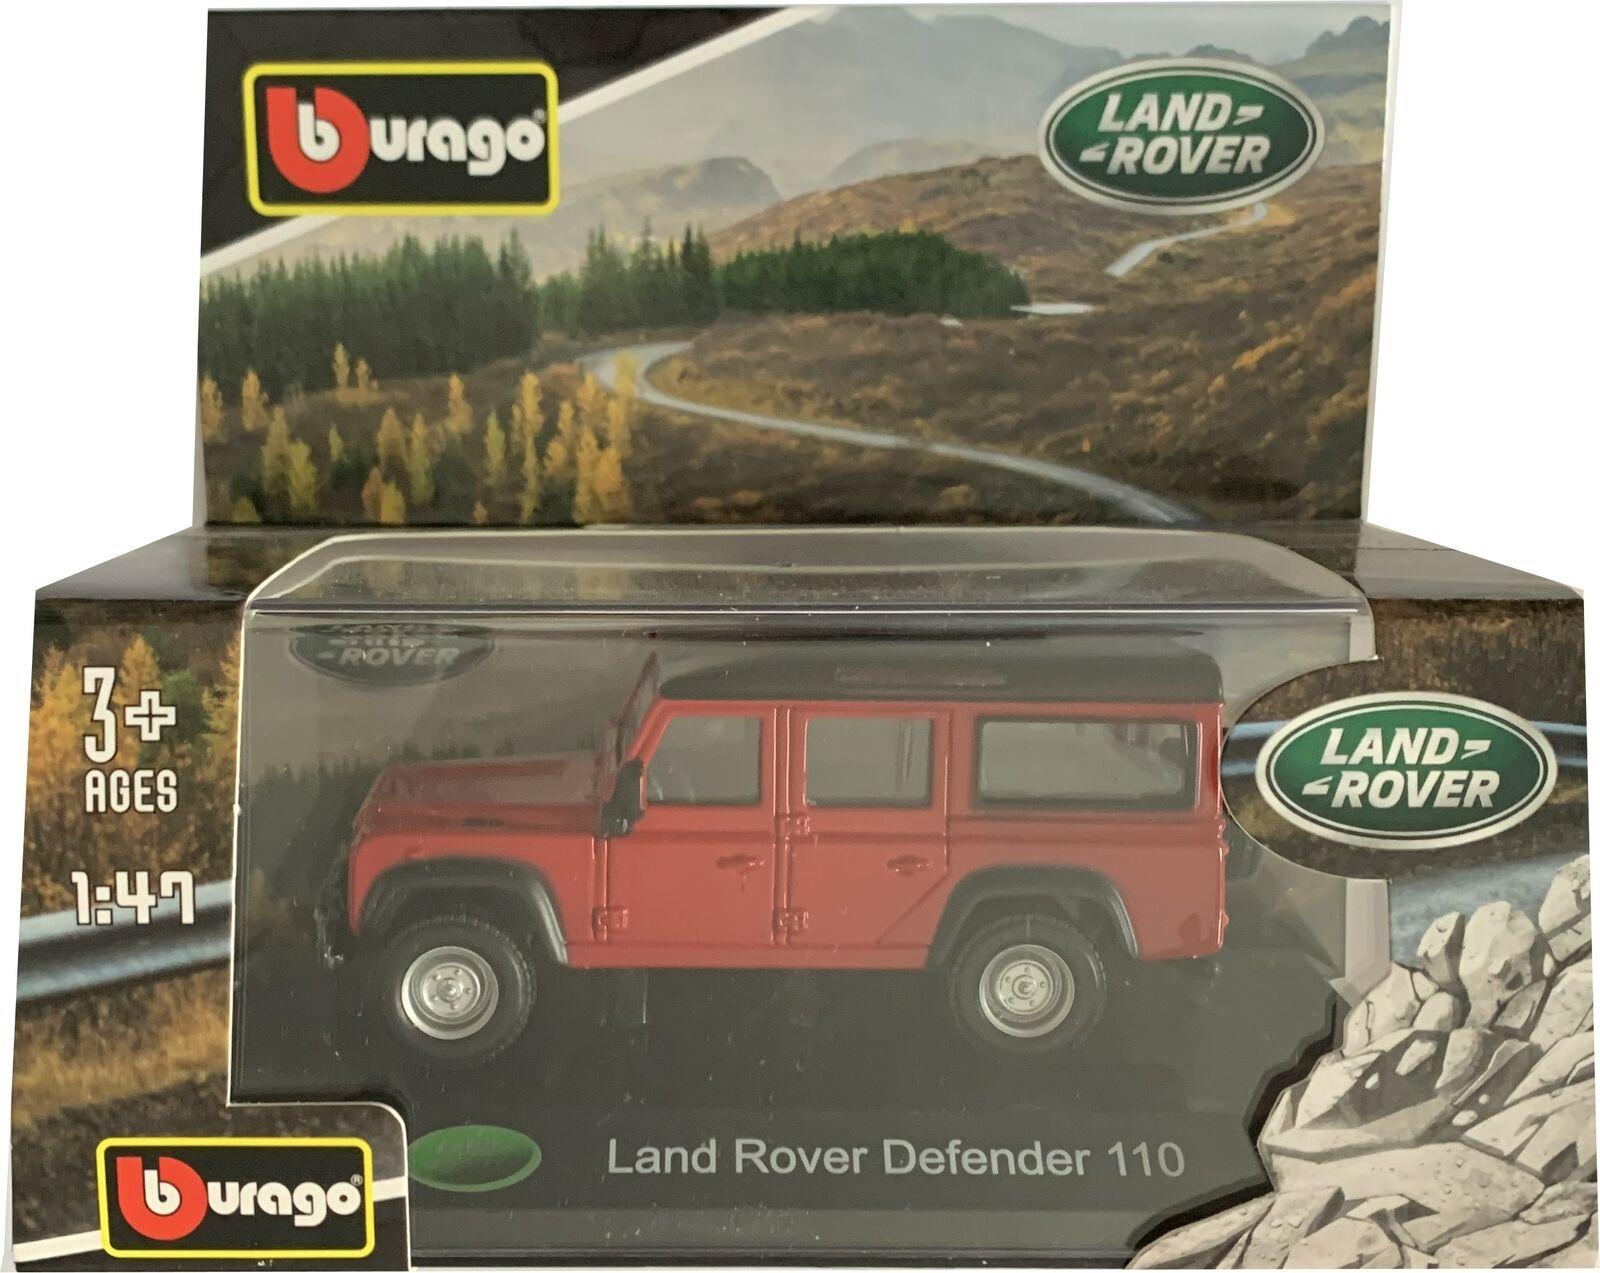 Land Rover defender 110 in Red 1:47 scale model from Bburago